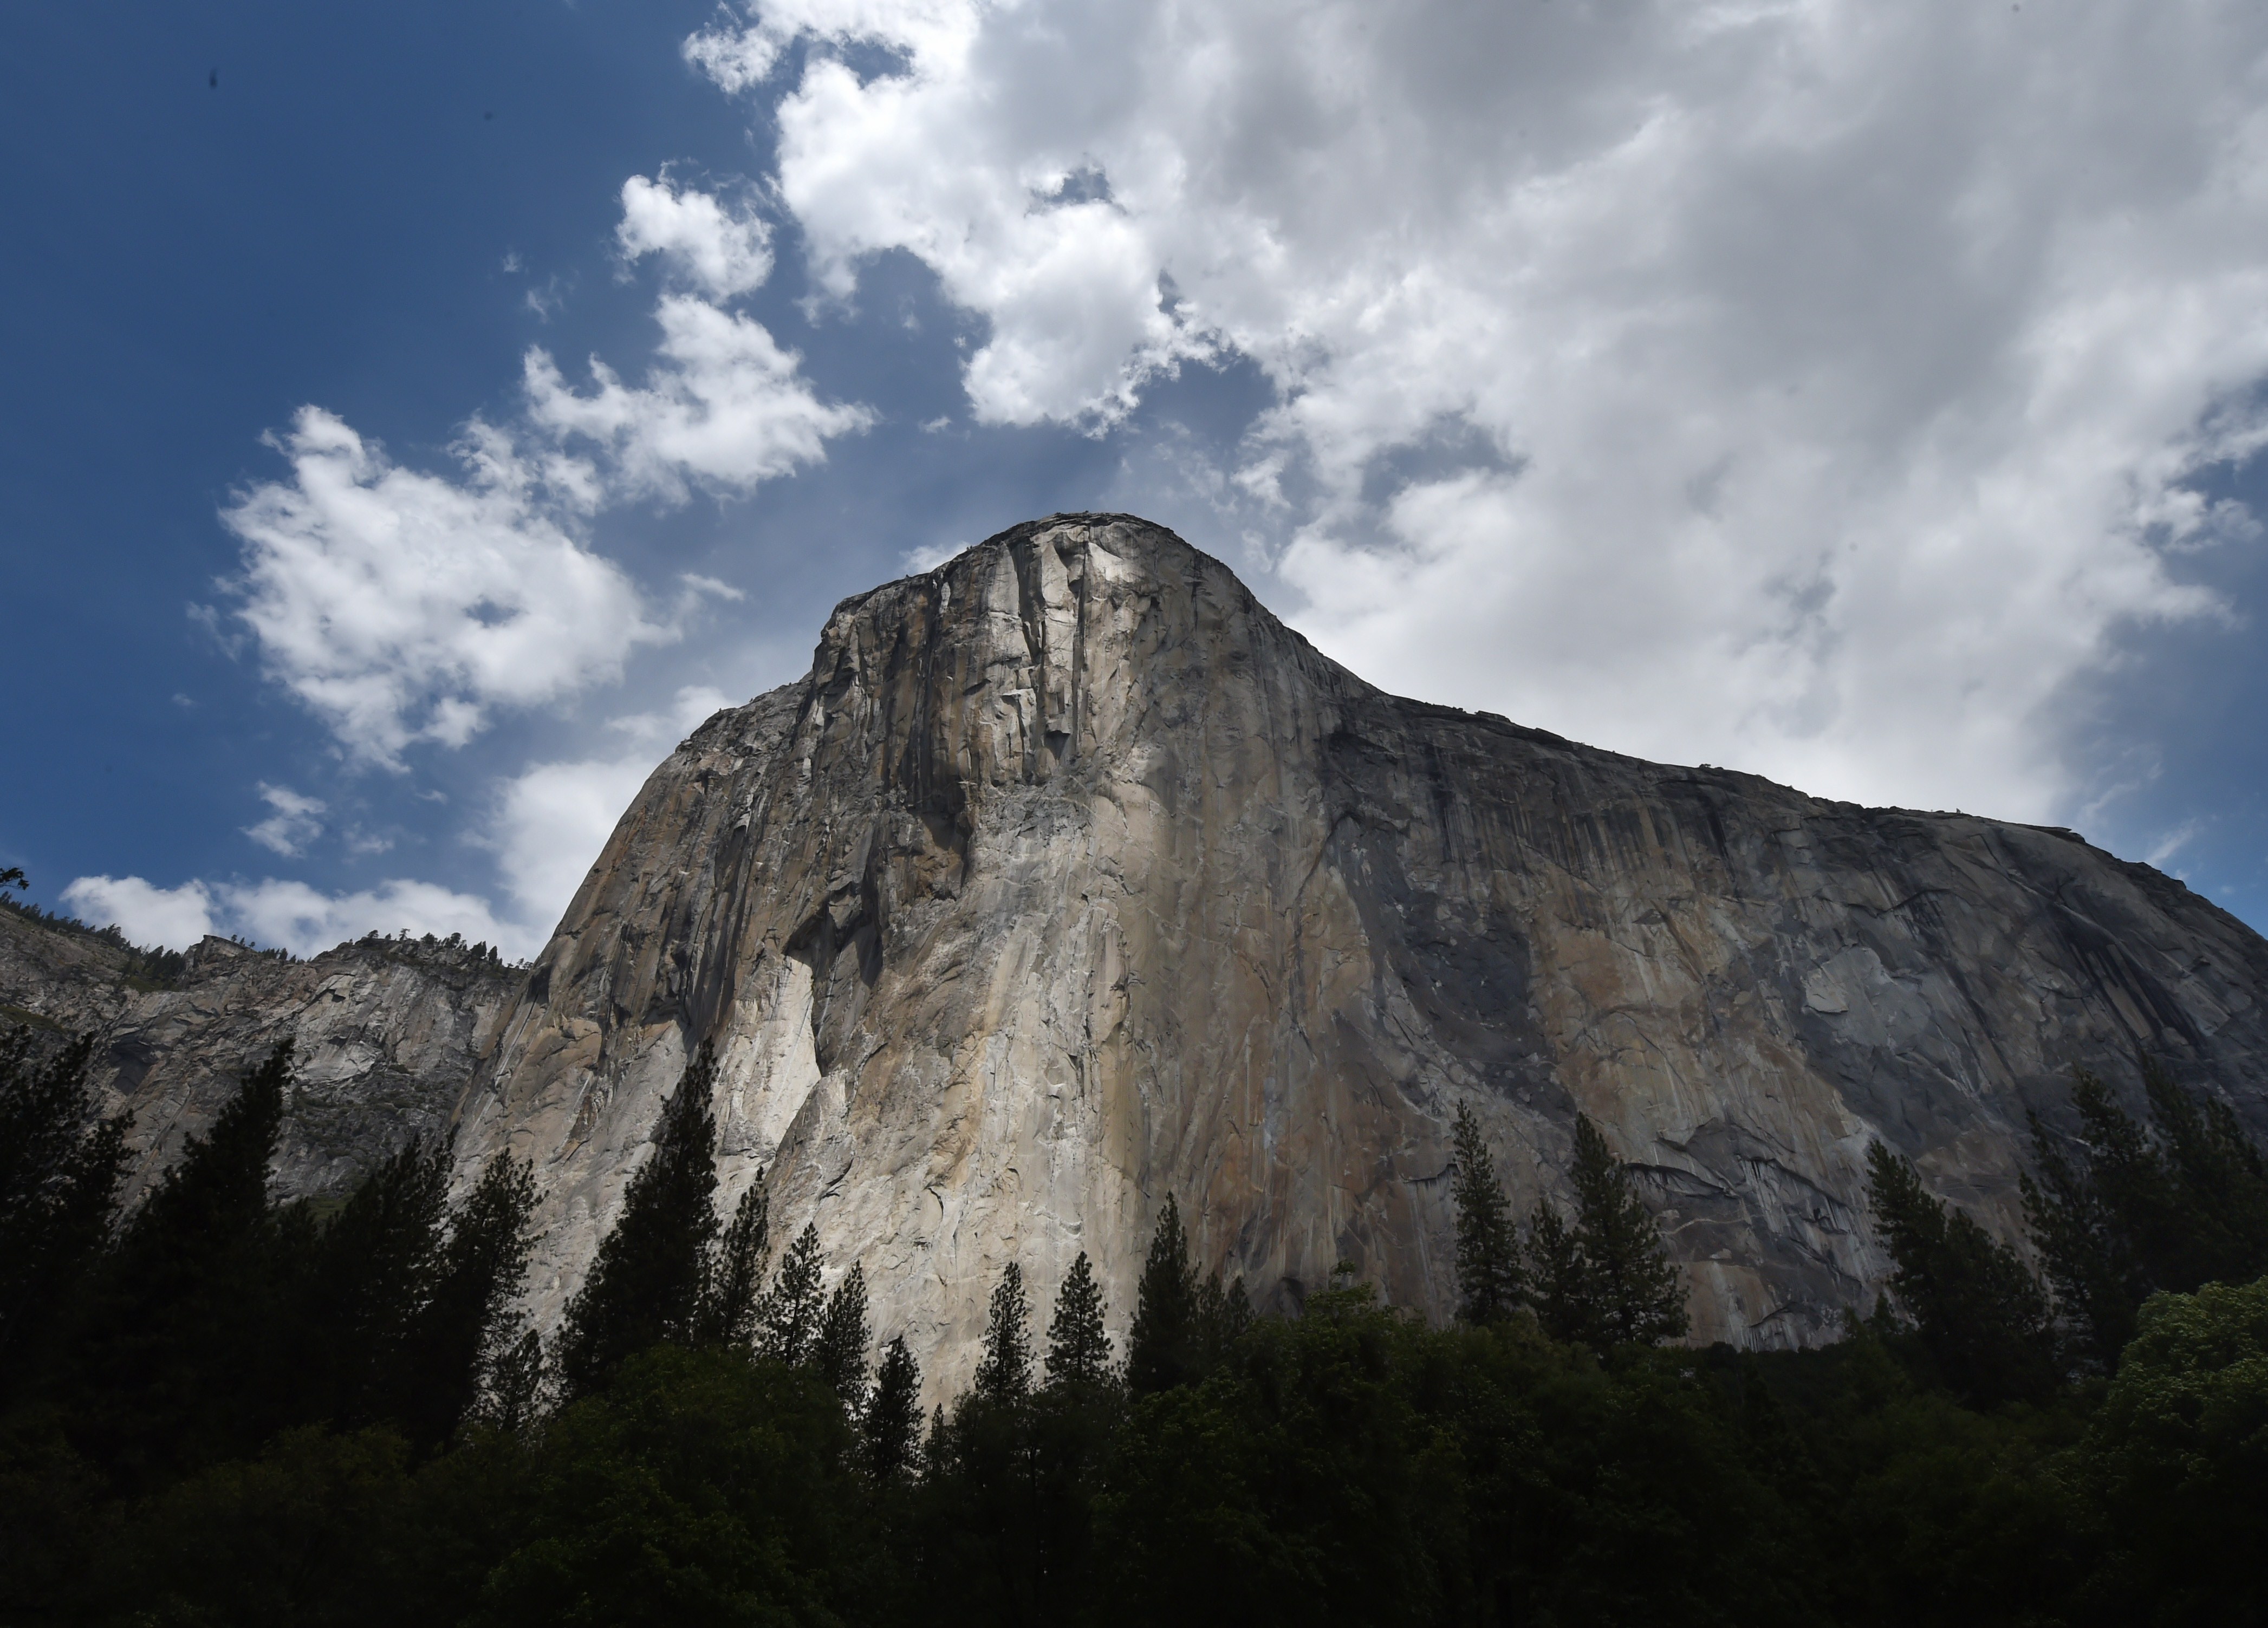 The El Capitan monolith in the Yosemite National Park in California on June 4, 2015. (MARK RALSTON—AFP/Getty Images)